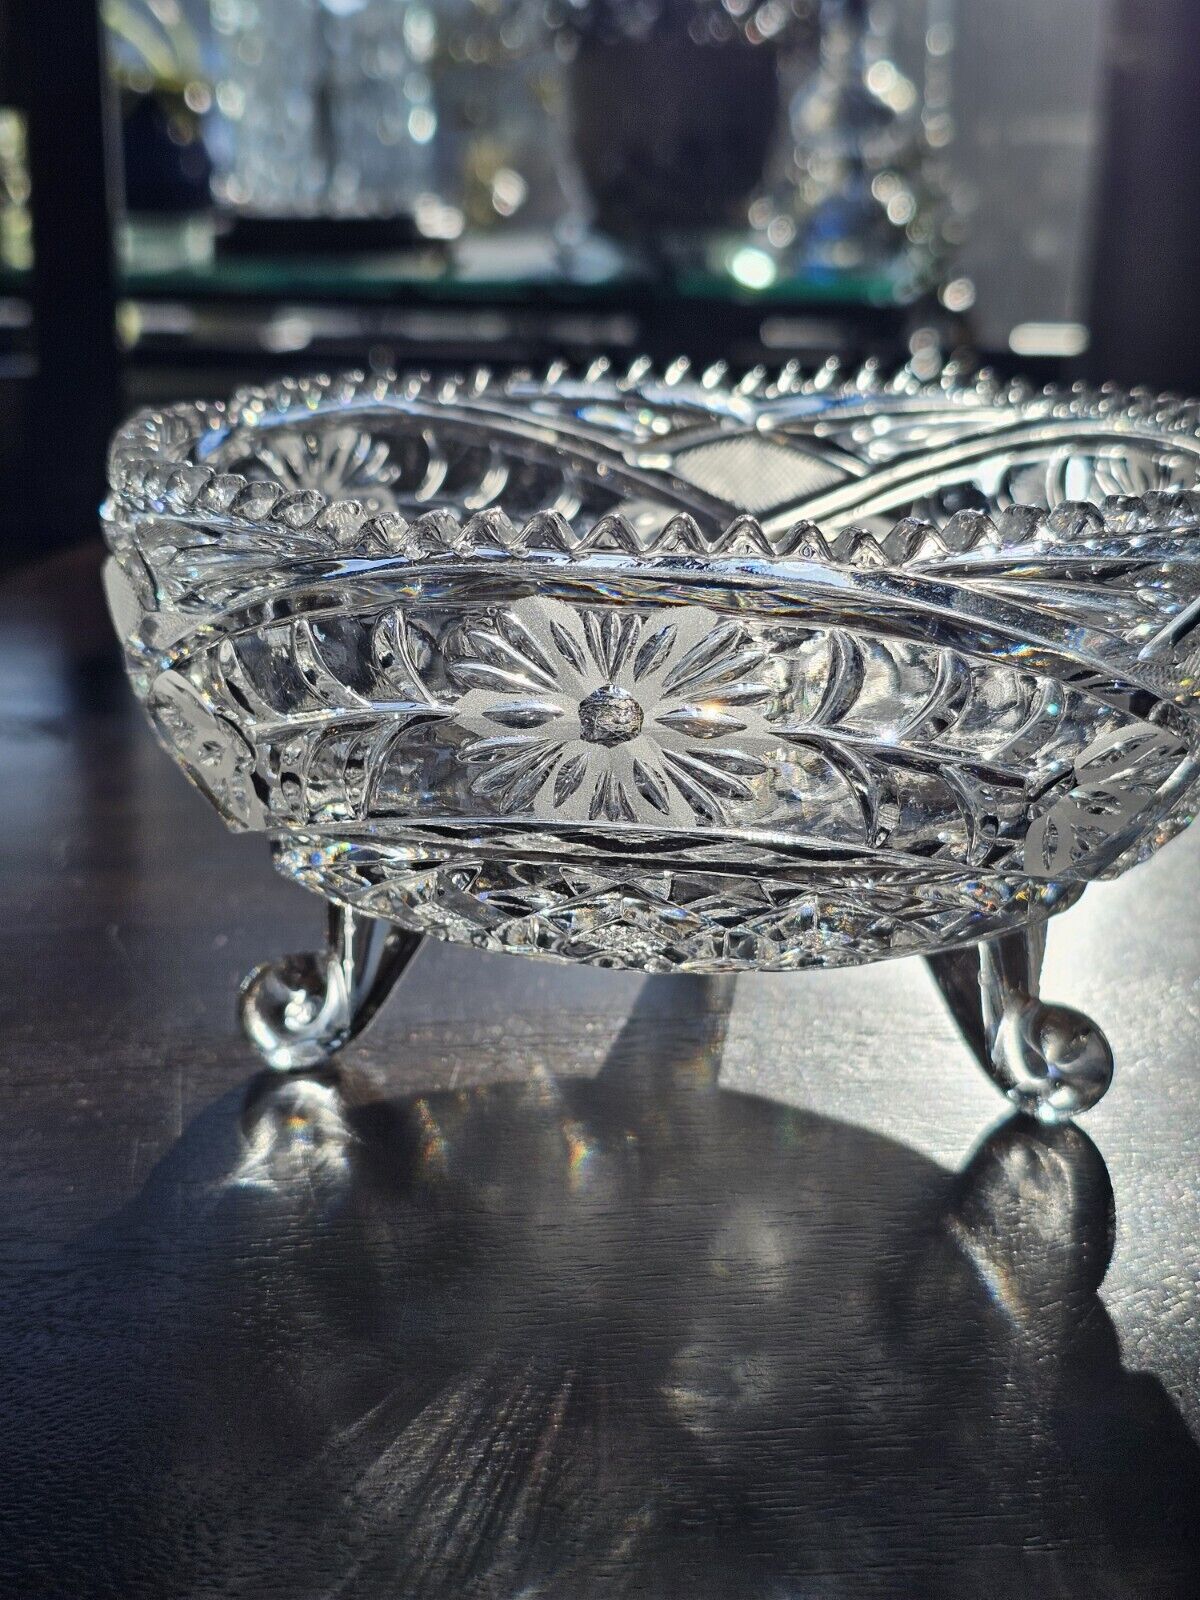 Vtg Imperlux 24% Cut Lead Crystal From Germany, 3 Footed, Etched Floral Design,